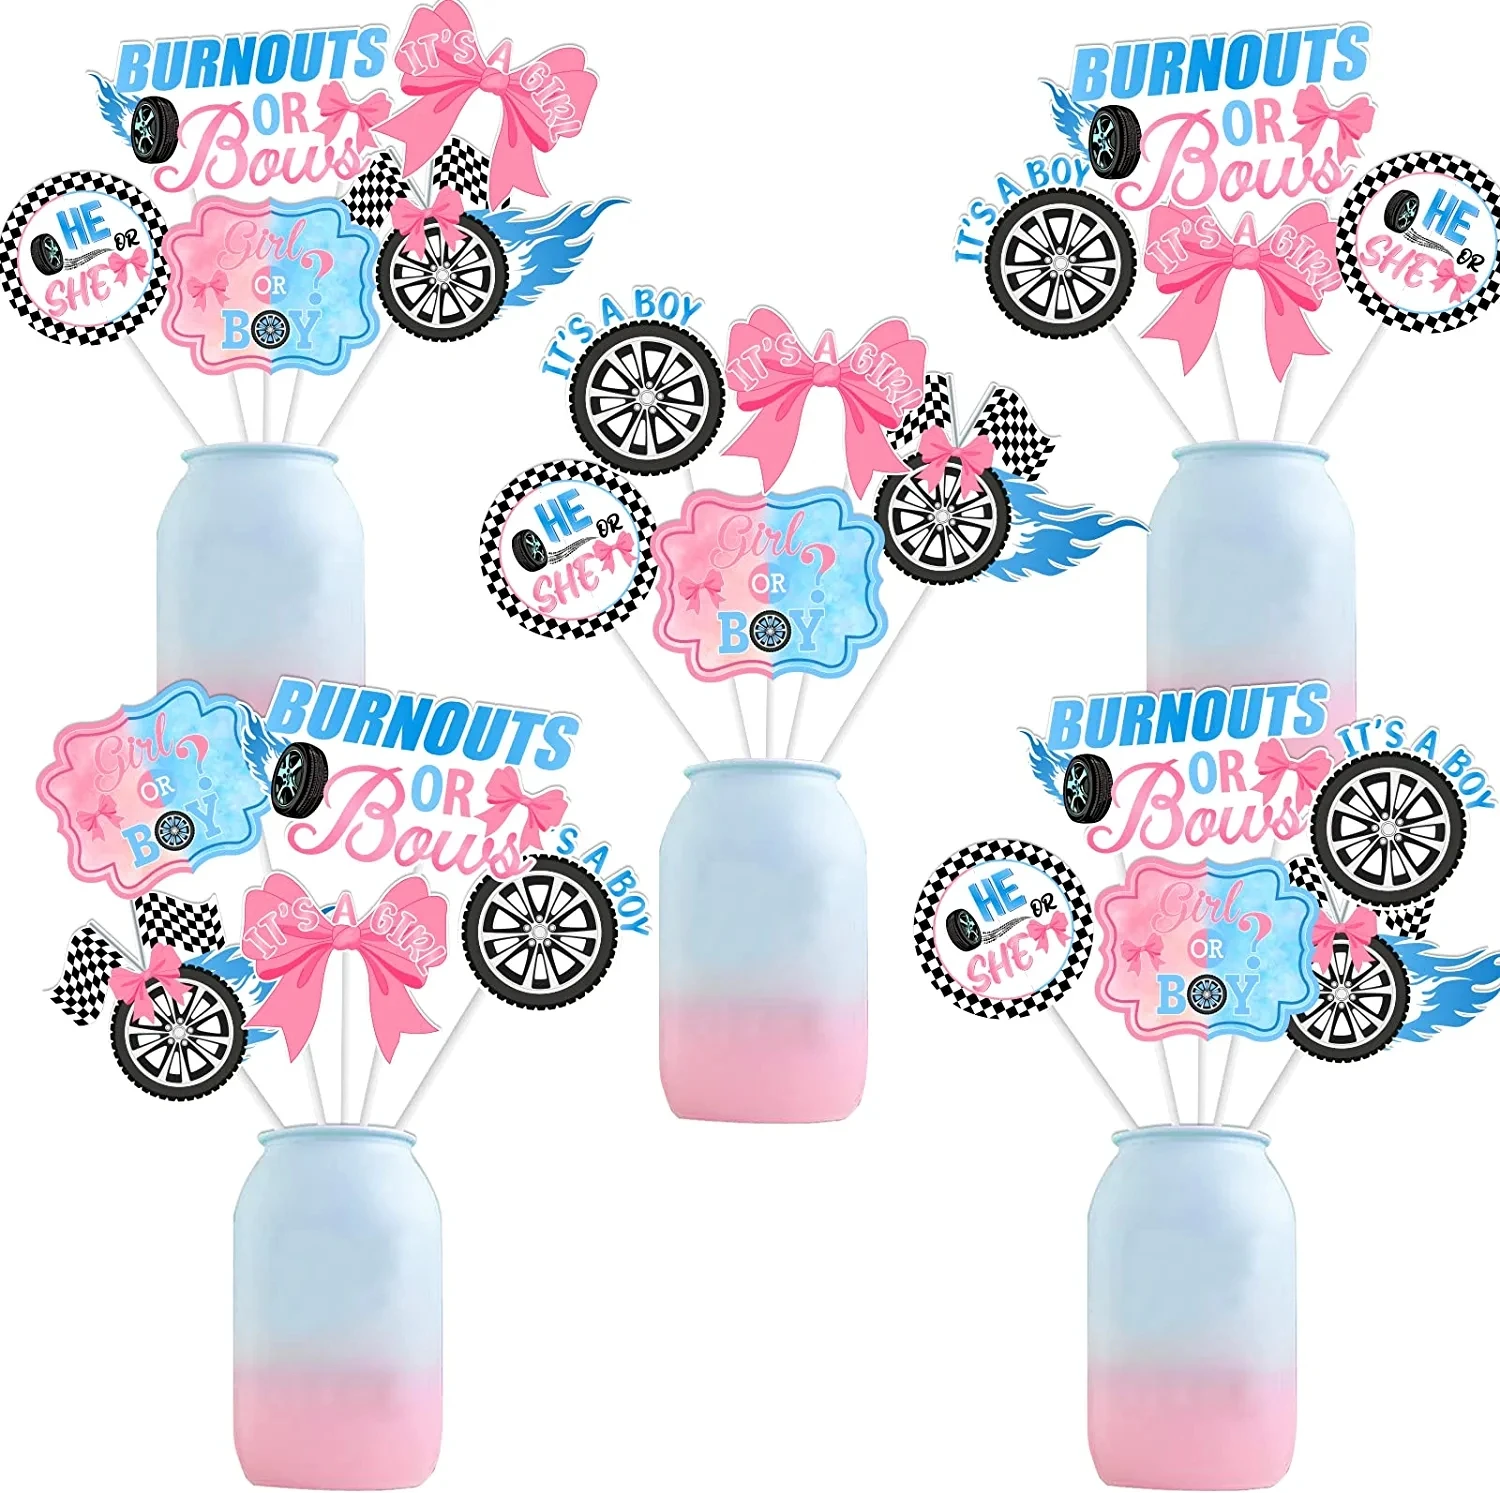 

24Pcs Burnouts or Bows Gender Reveal Centerpiece Sticks Blue Pink Table Toppers Boy or Girl Pregnancy Celebrate Party Decoration